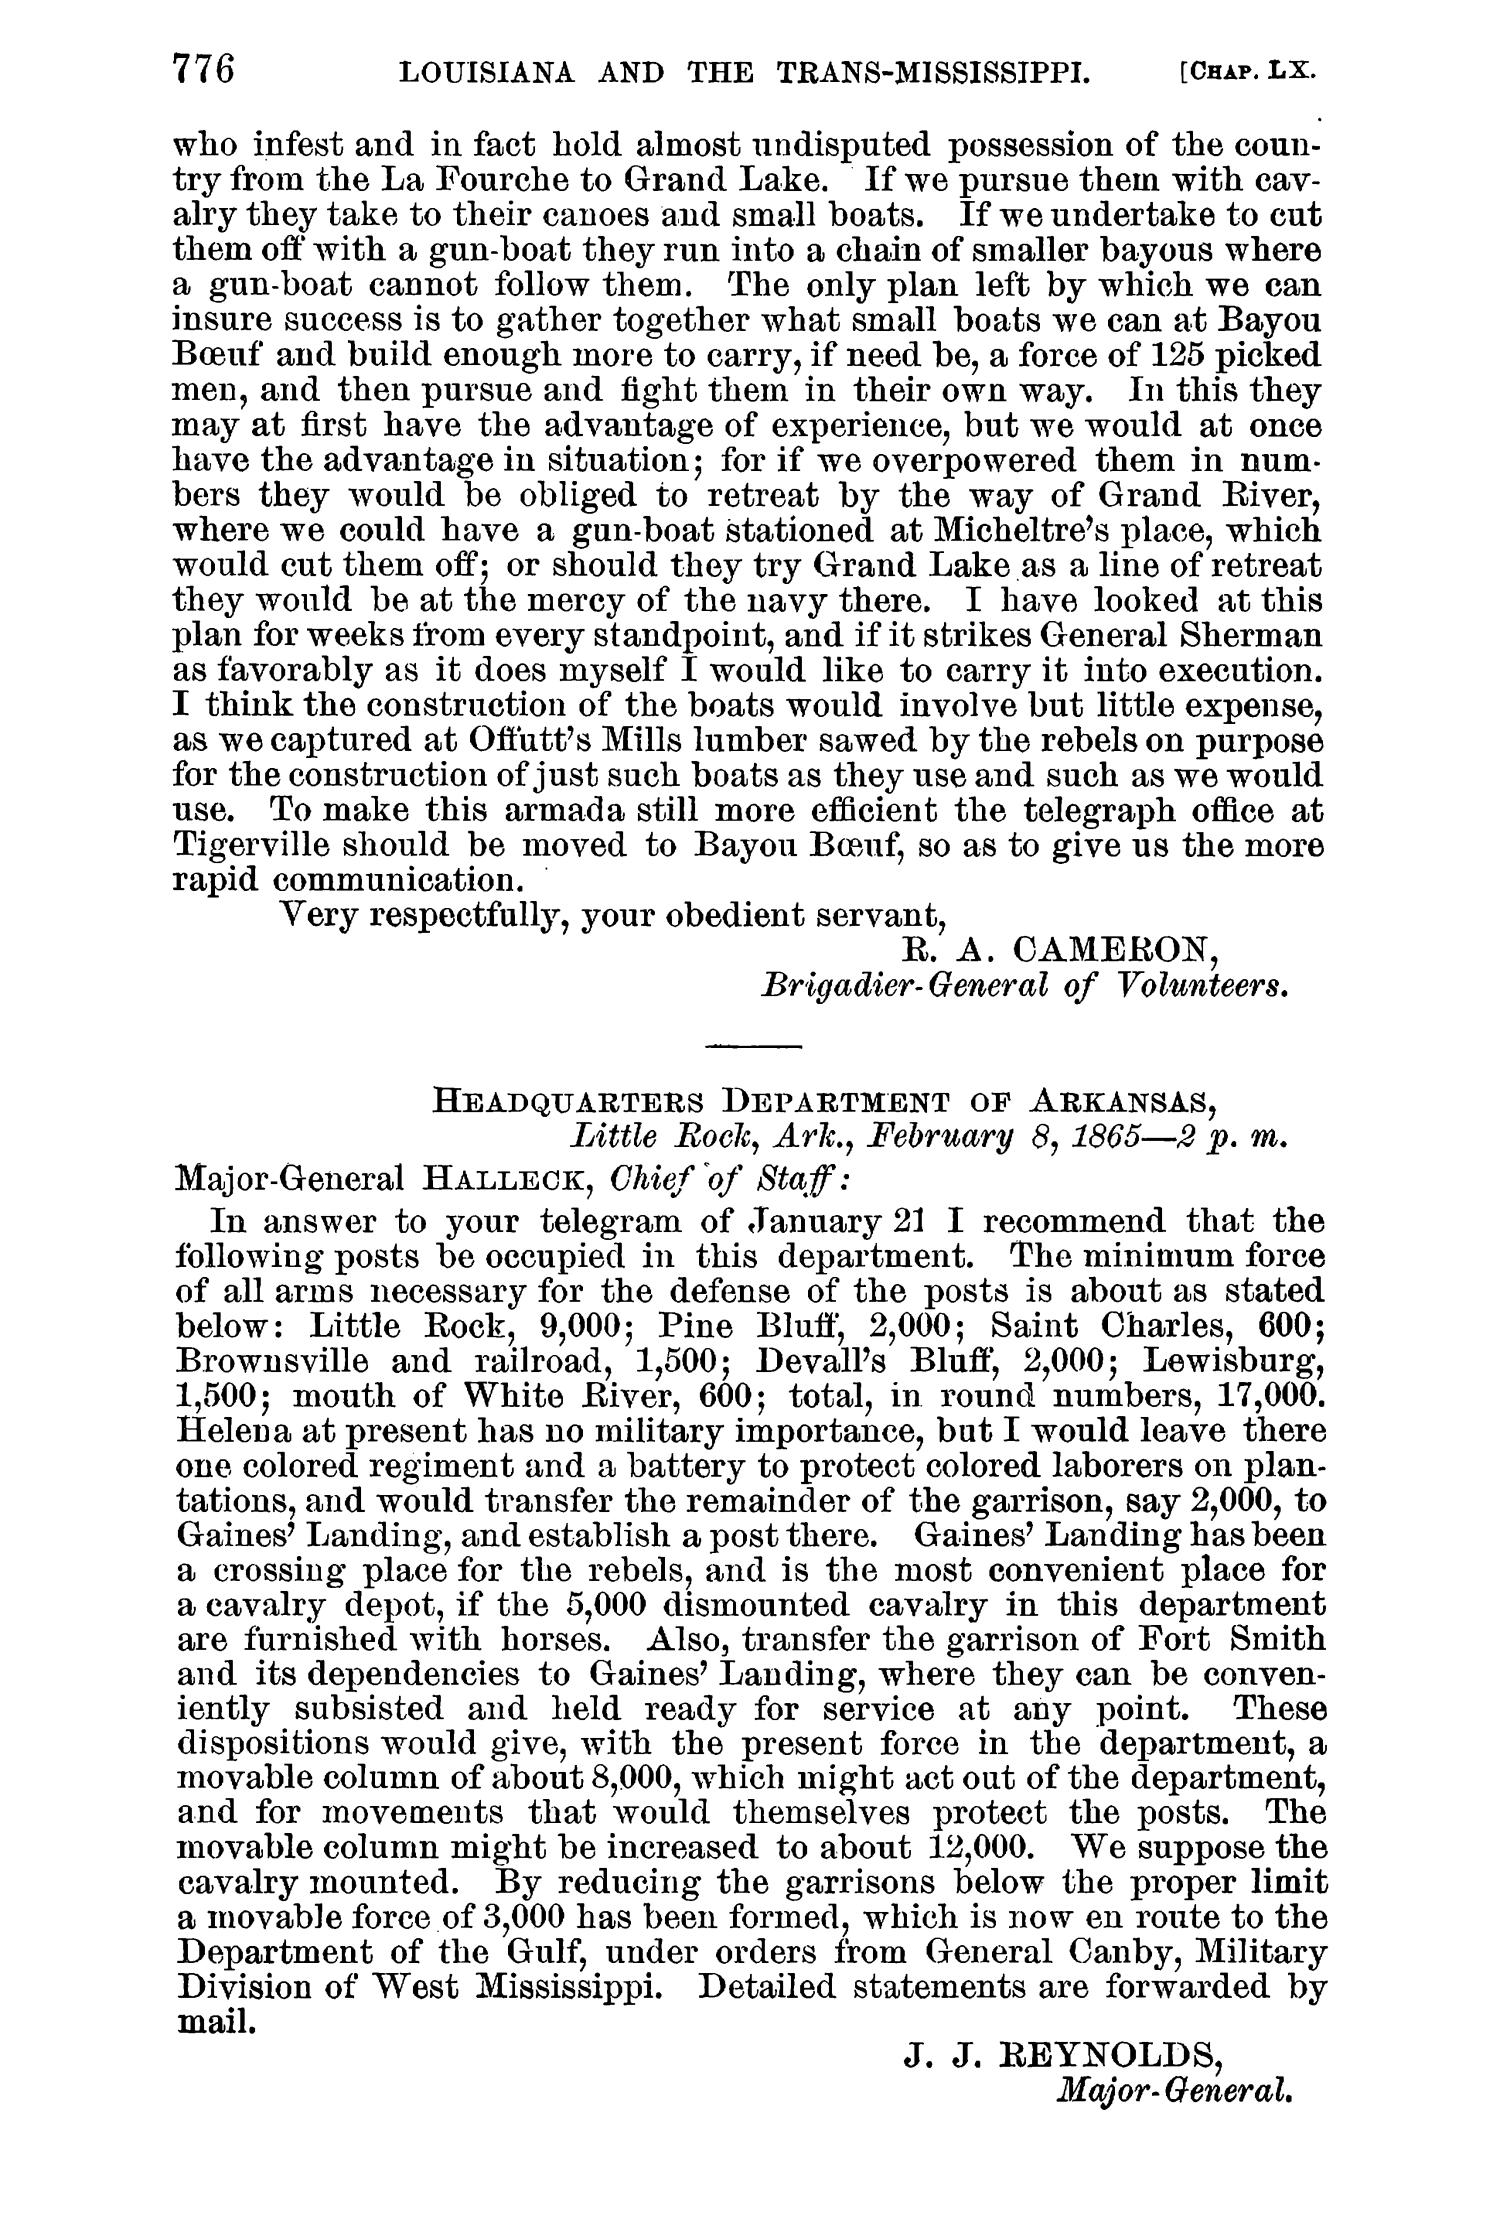 The War of the Rebellion: A Compilation of the Official Records of the Union And Confederate Armies. Series 1, Volume 48, In Two Parts. Part 1, Reports, Correspondence, etc.
                                                
                                                    776
                                                